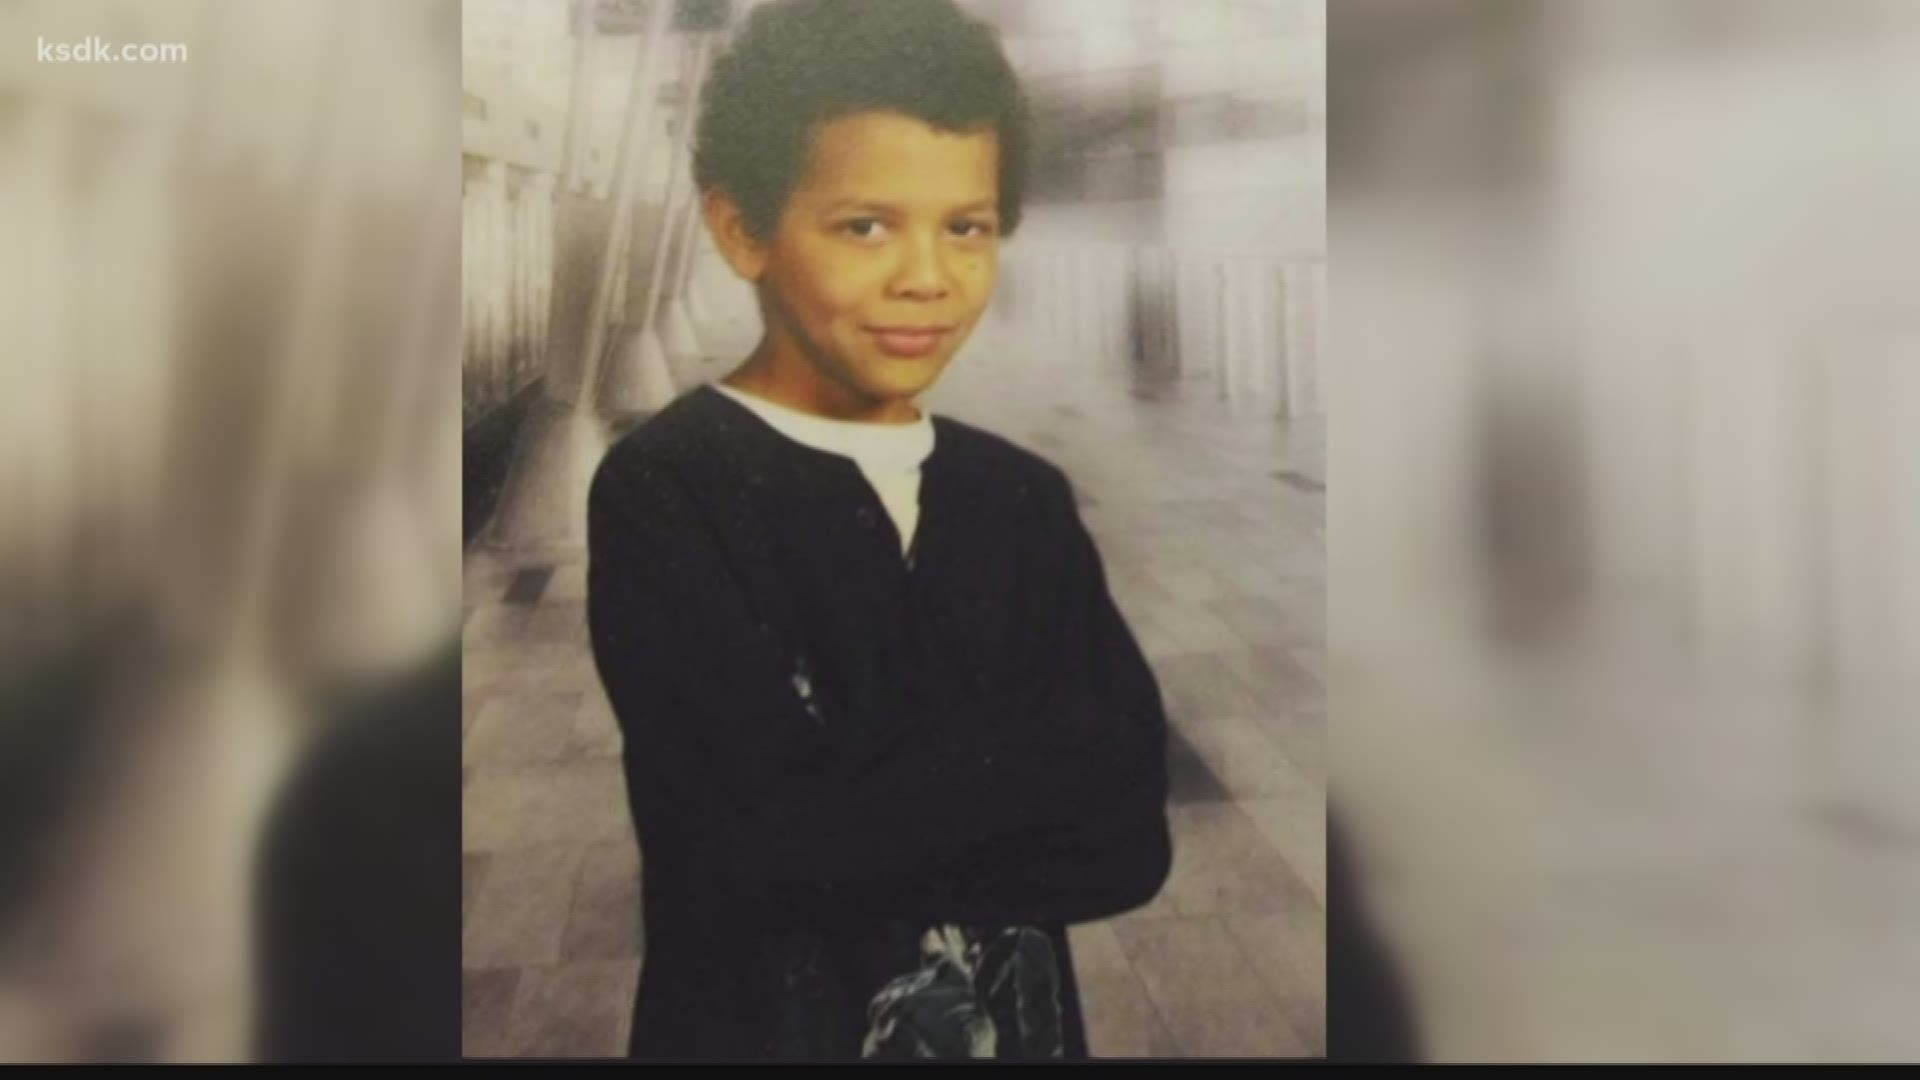 Mom needs $1,500 for son's headstone